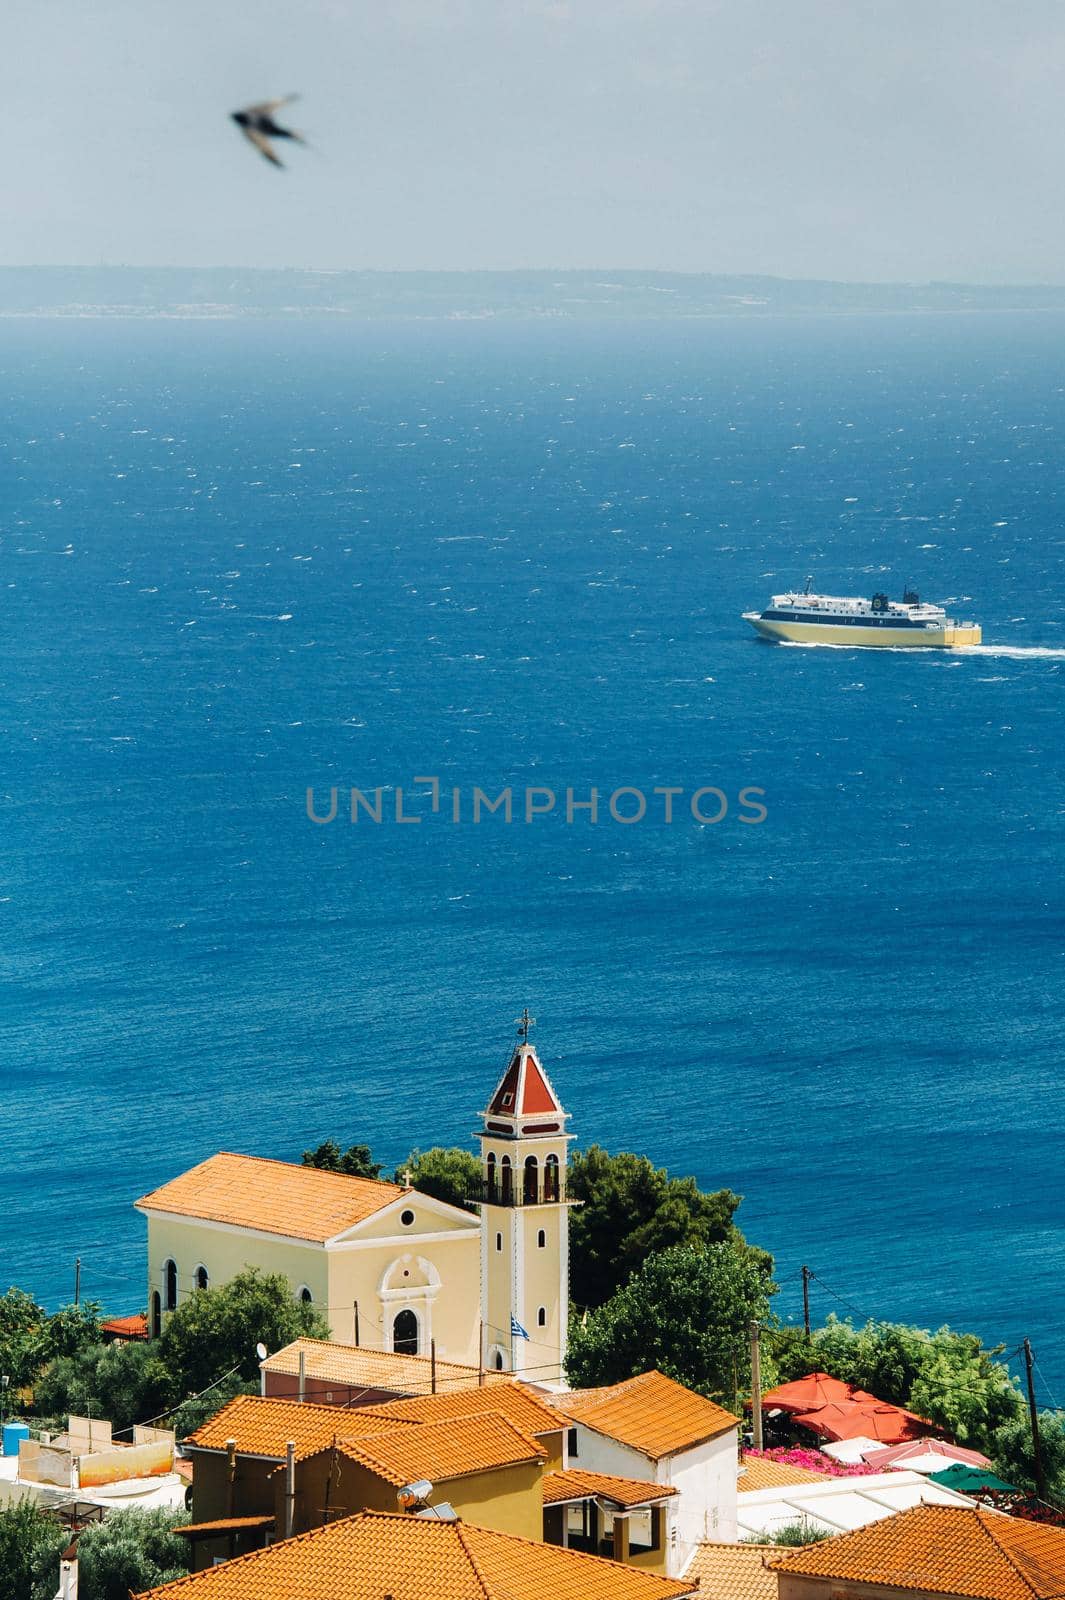 view from the height of the Church of the island of Zakynthos.In the distance, a ferry sails across the Ionian sea. the island of Zakynthos, Greece.